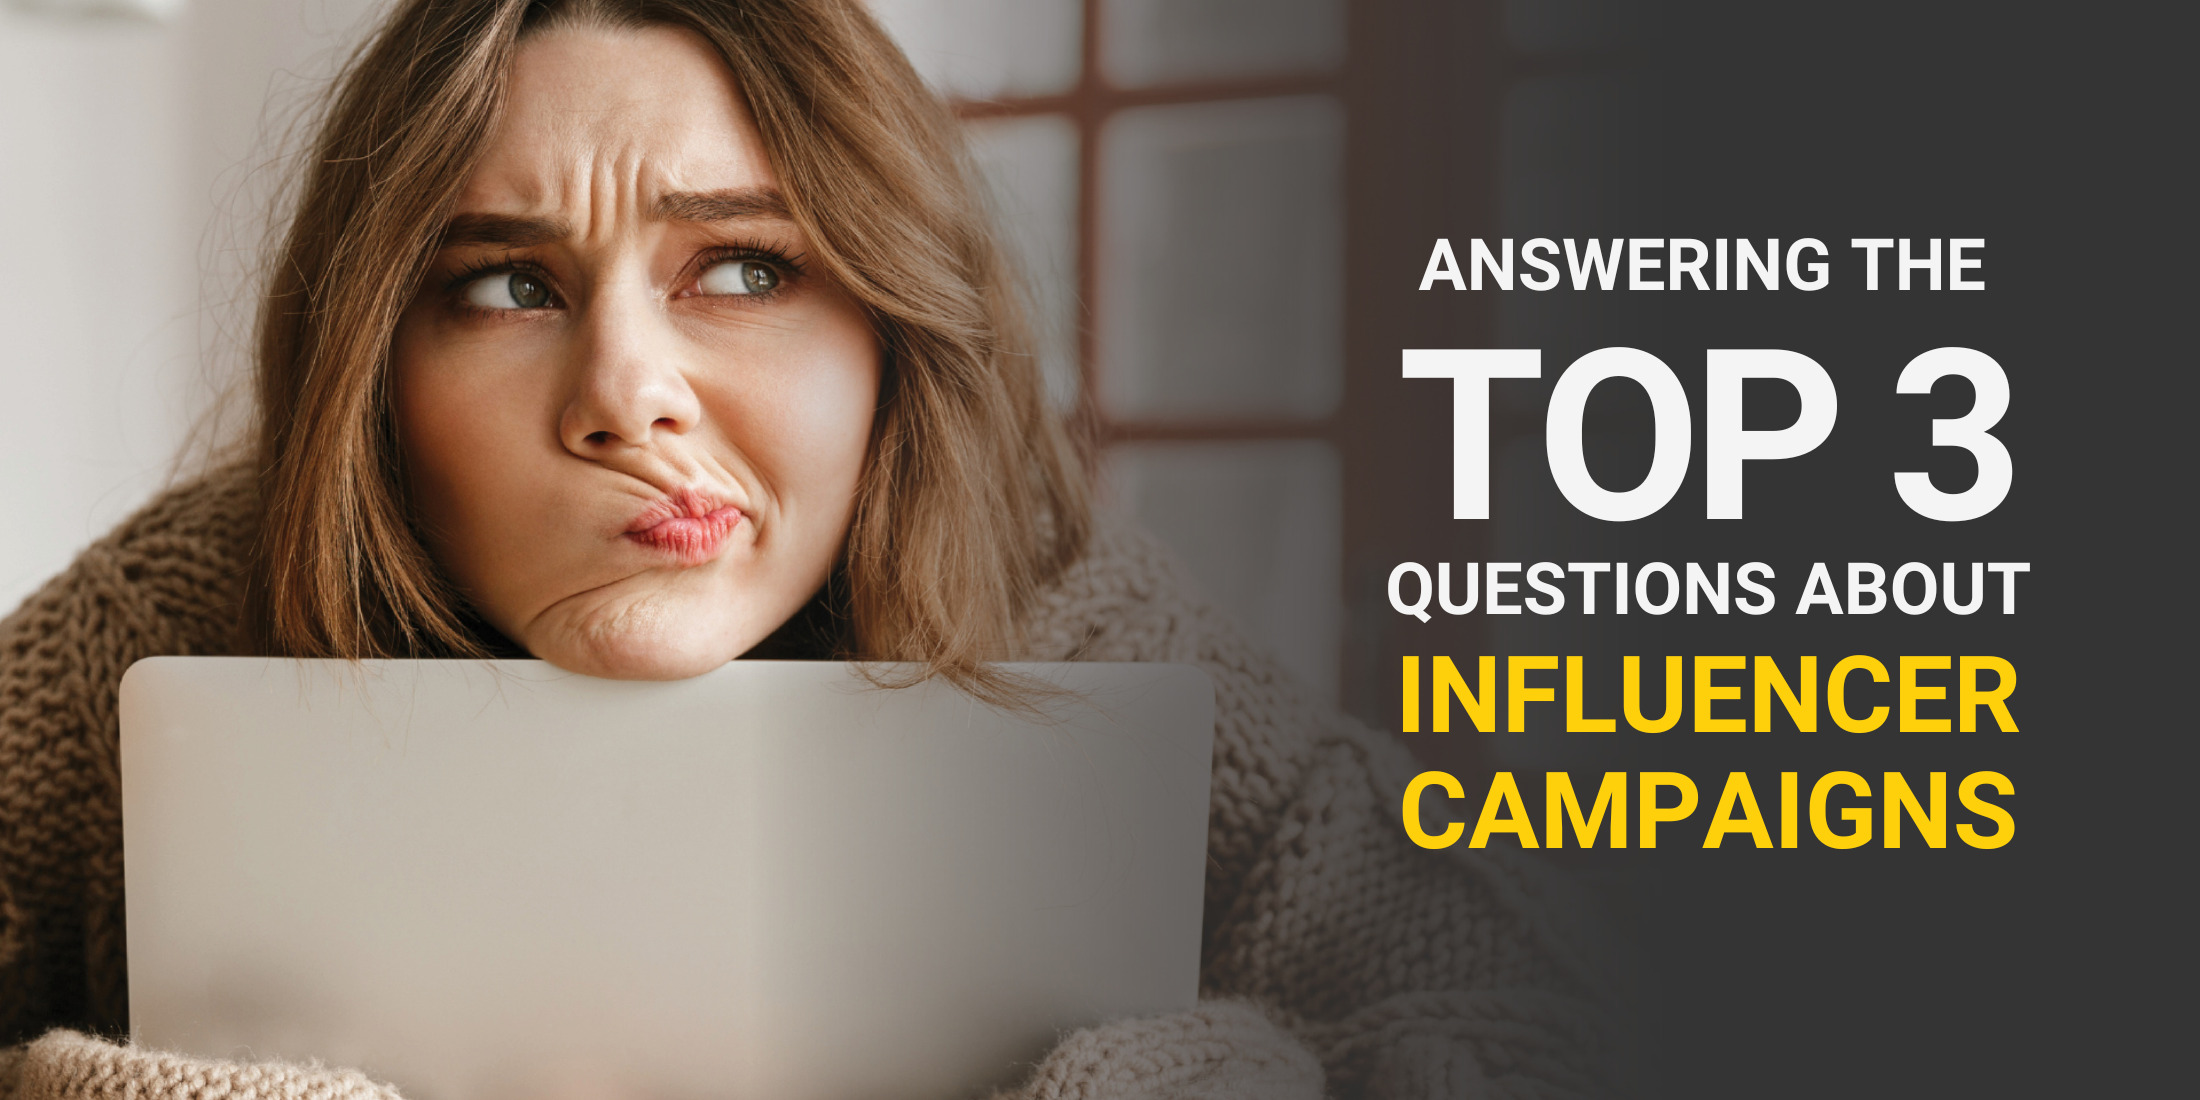 Answers to the 3 Most Common Questions About Influencer Marketing Campaigns